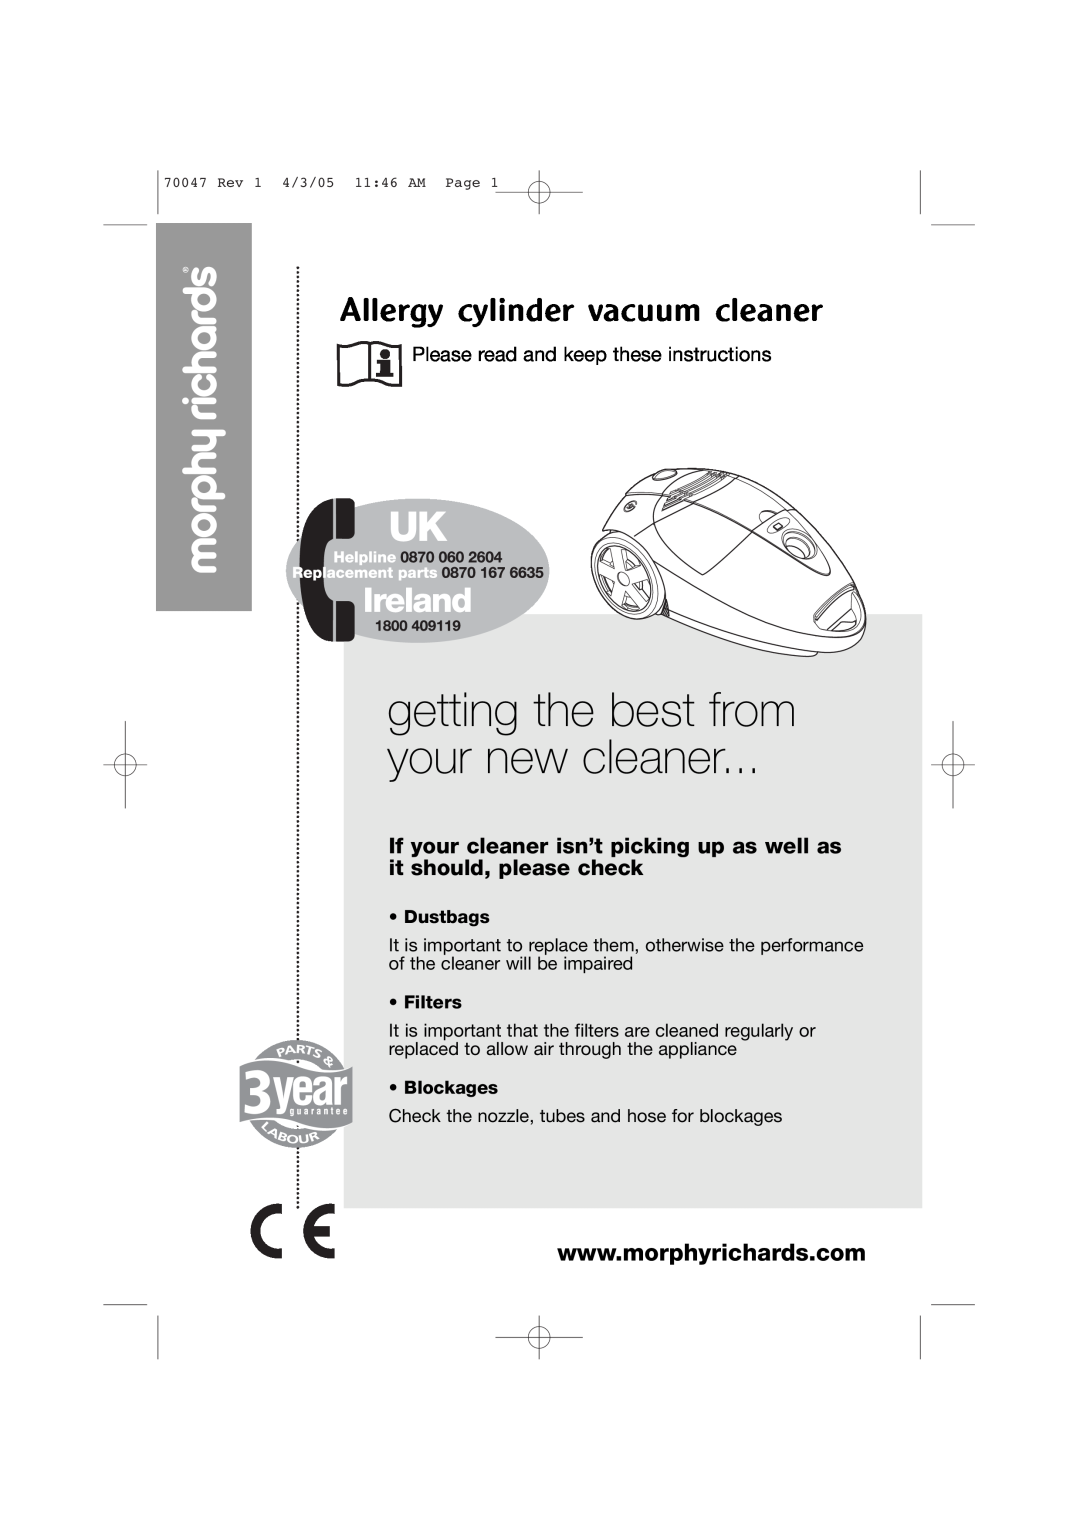 Morphy Richards Allergy cylinder vacuum cleaner manual getting the best from your new cleaner, Dustbags, Filters 